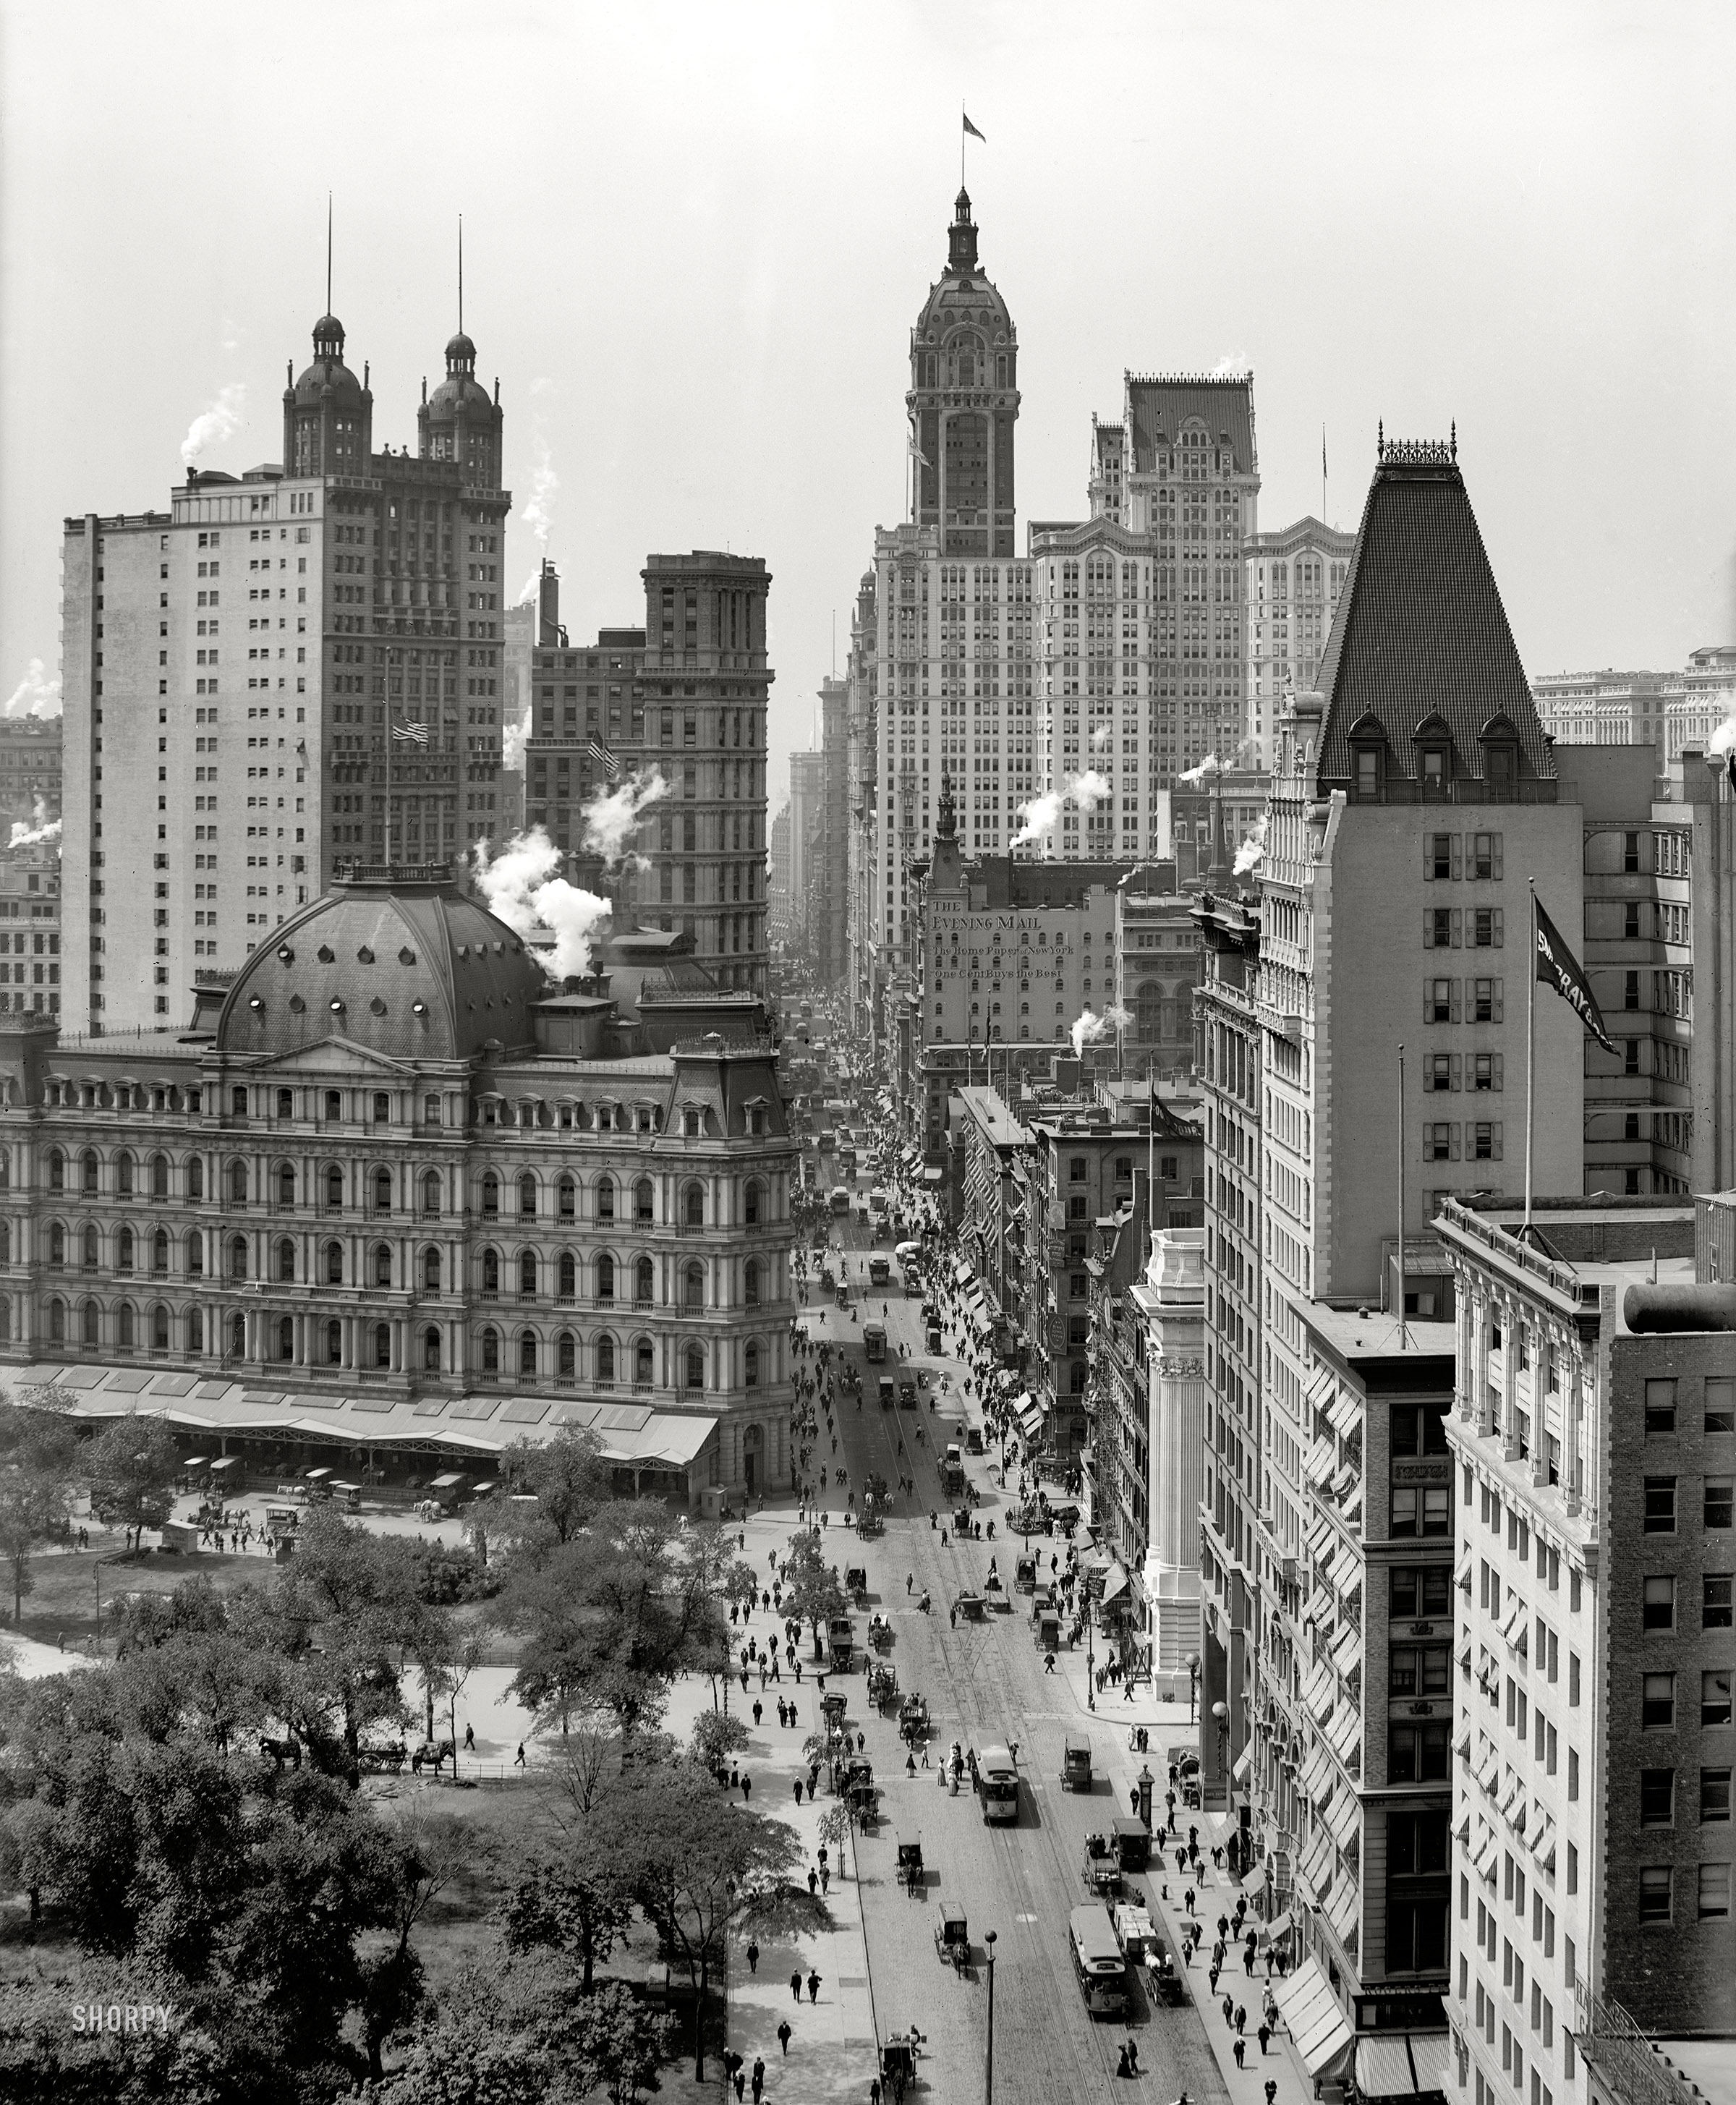 A vertiginous view of New York circa 1910. "Broadway from Chambers Street -- City Hall Park, Post Office, Park Row, City Investing and Singer buildings." 8x10 inch dry plate  glass negative, Detroit Publishing Company. View full size.